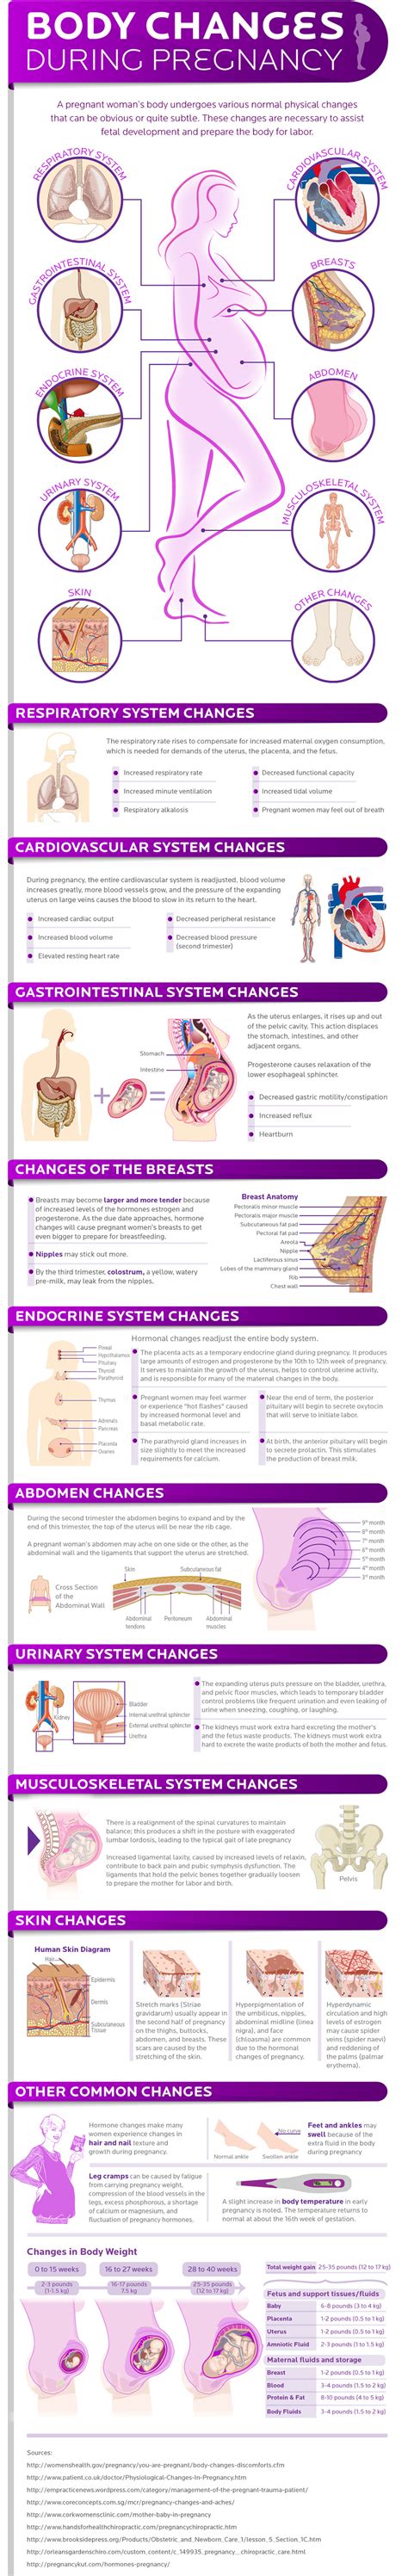 How Your Body Changes During Pregnancy American Pregnancy Asc